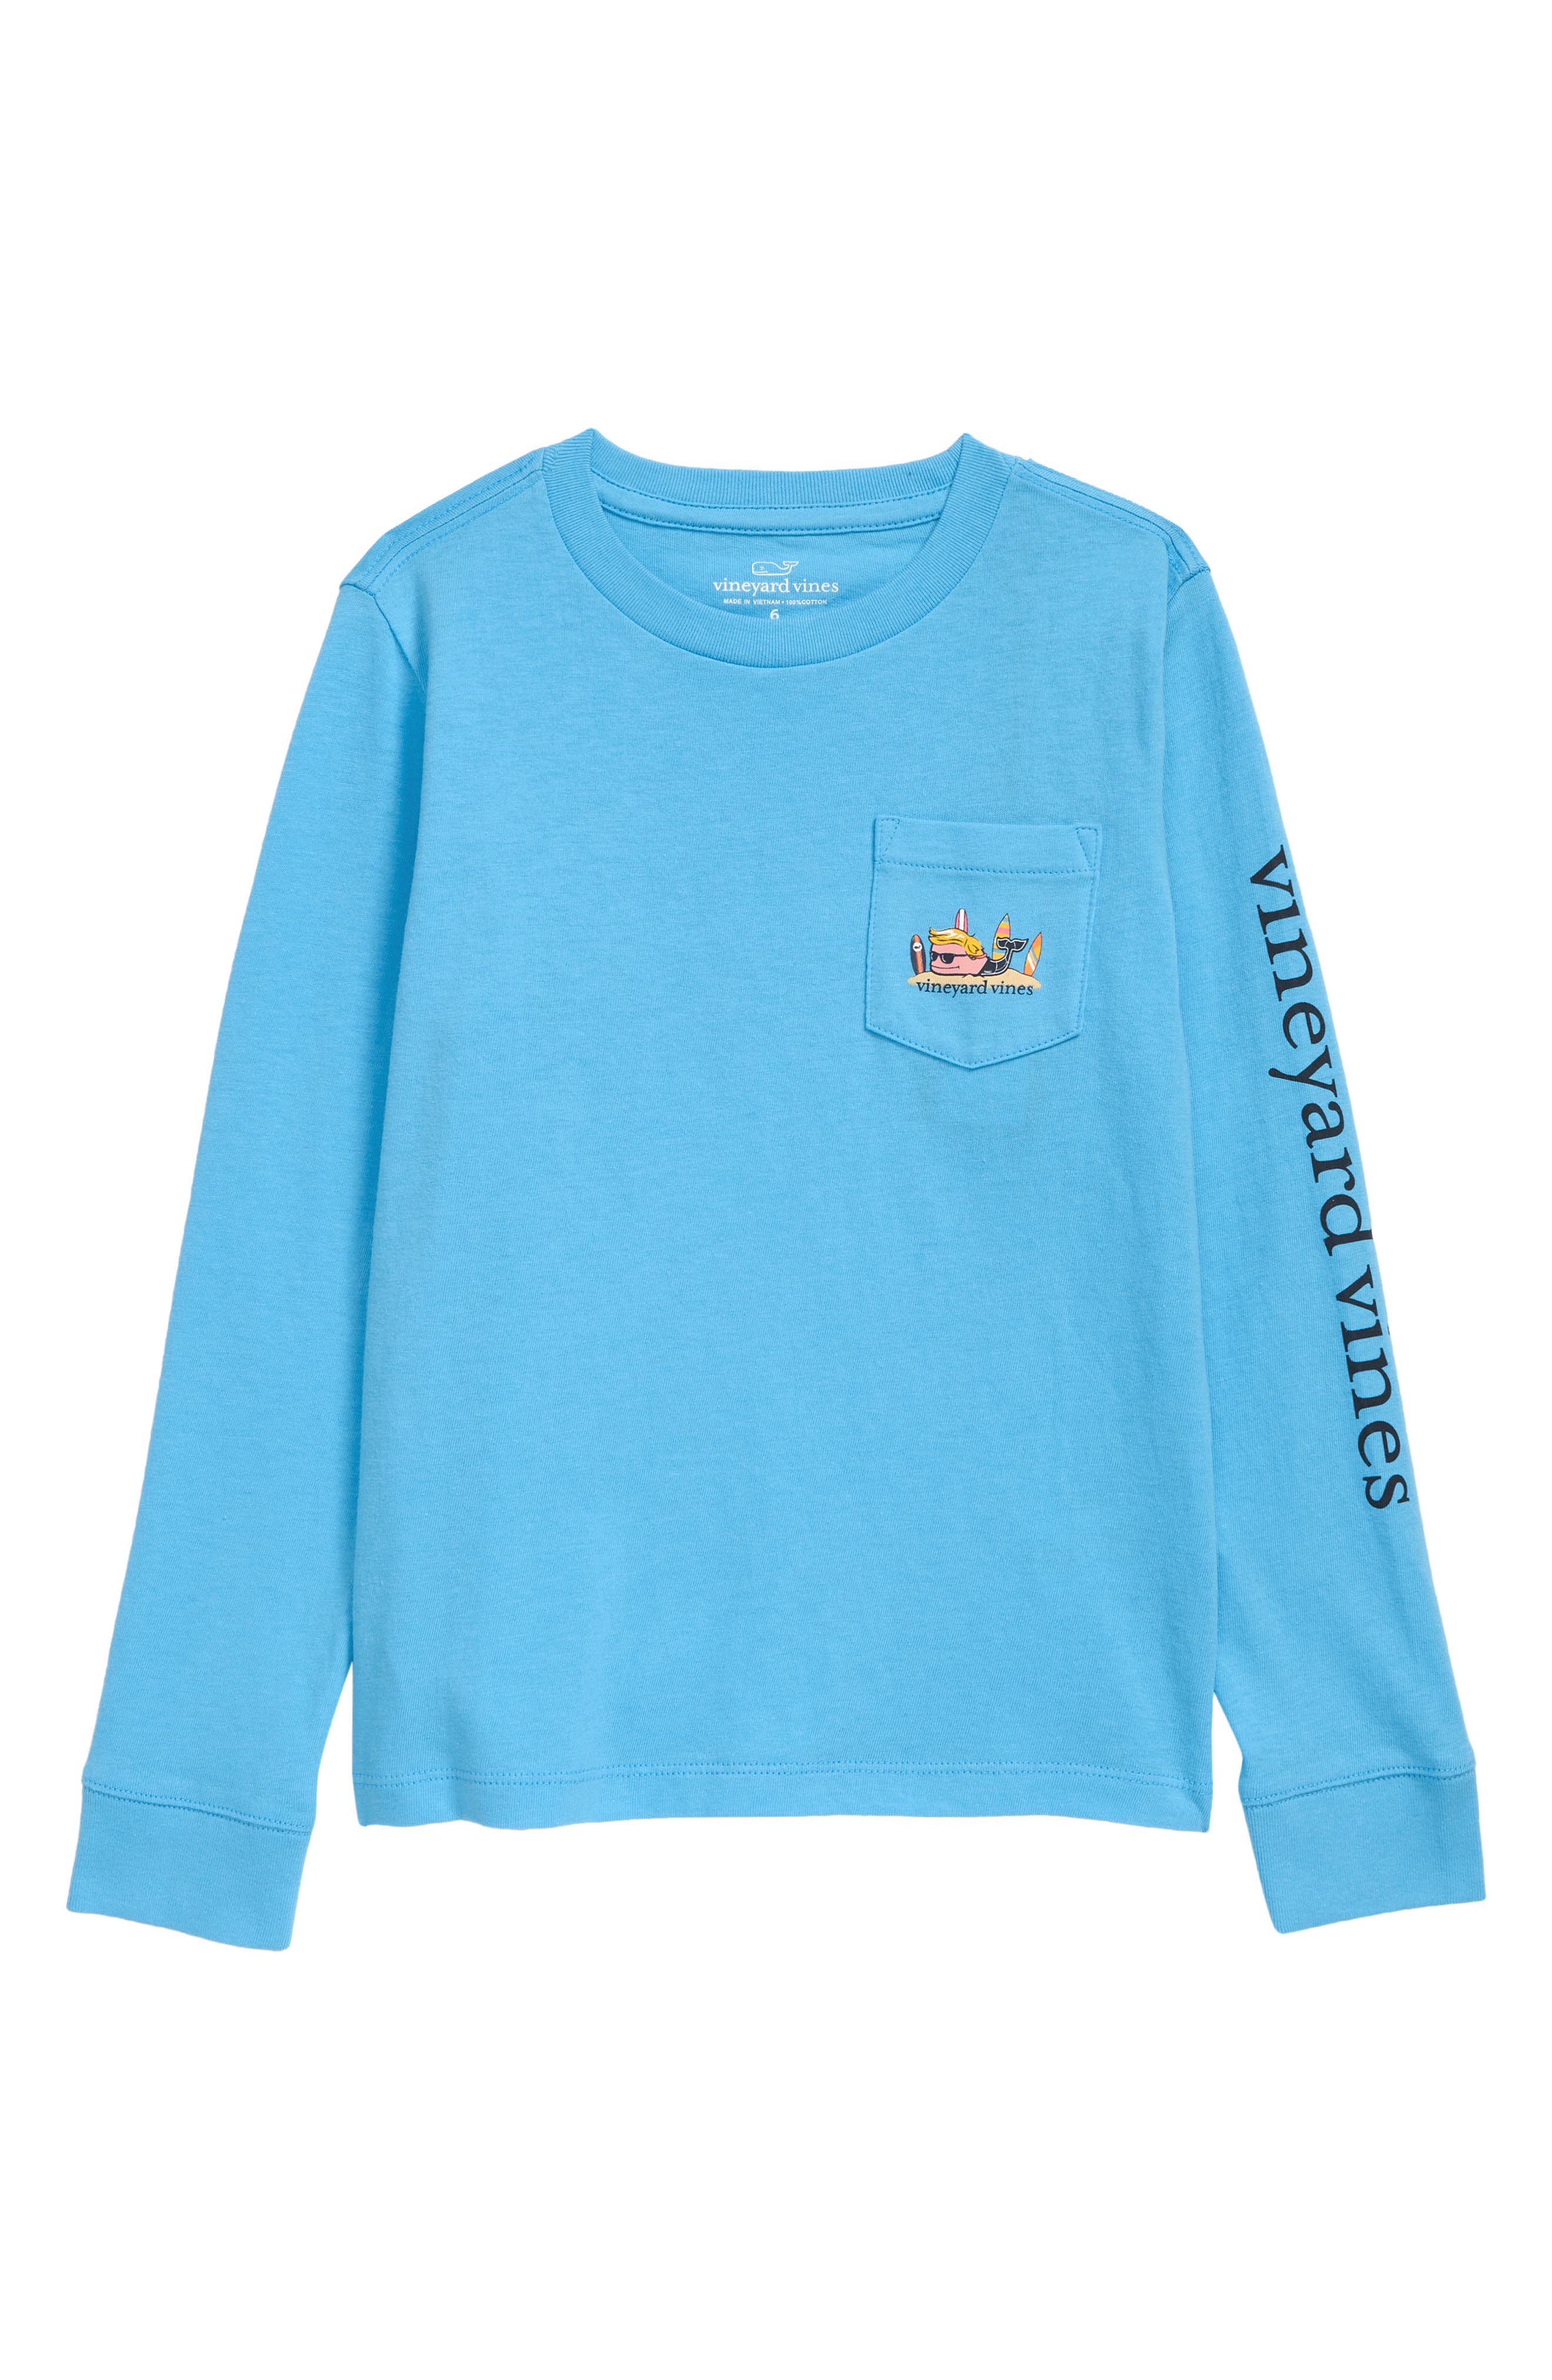 Crazy 8 Boys' His Li'l Long-Sleeve Graphic Tee Size 3t 